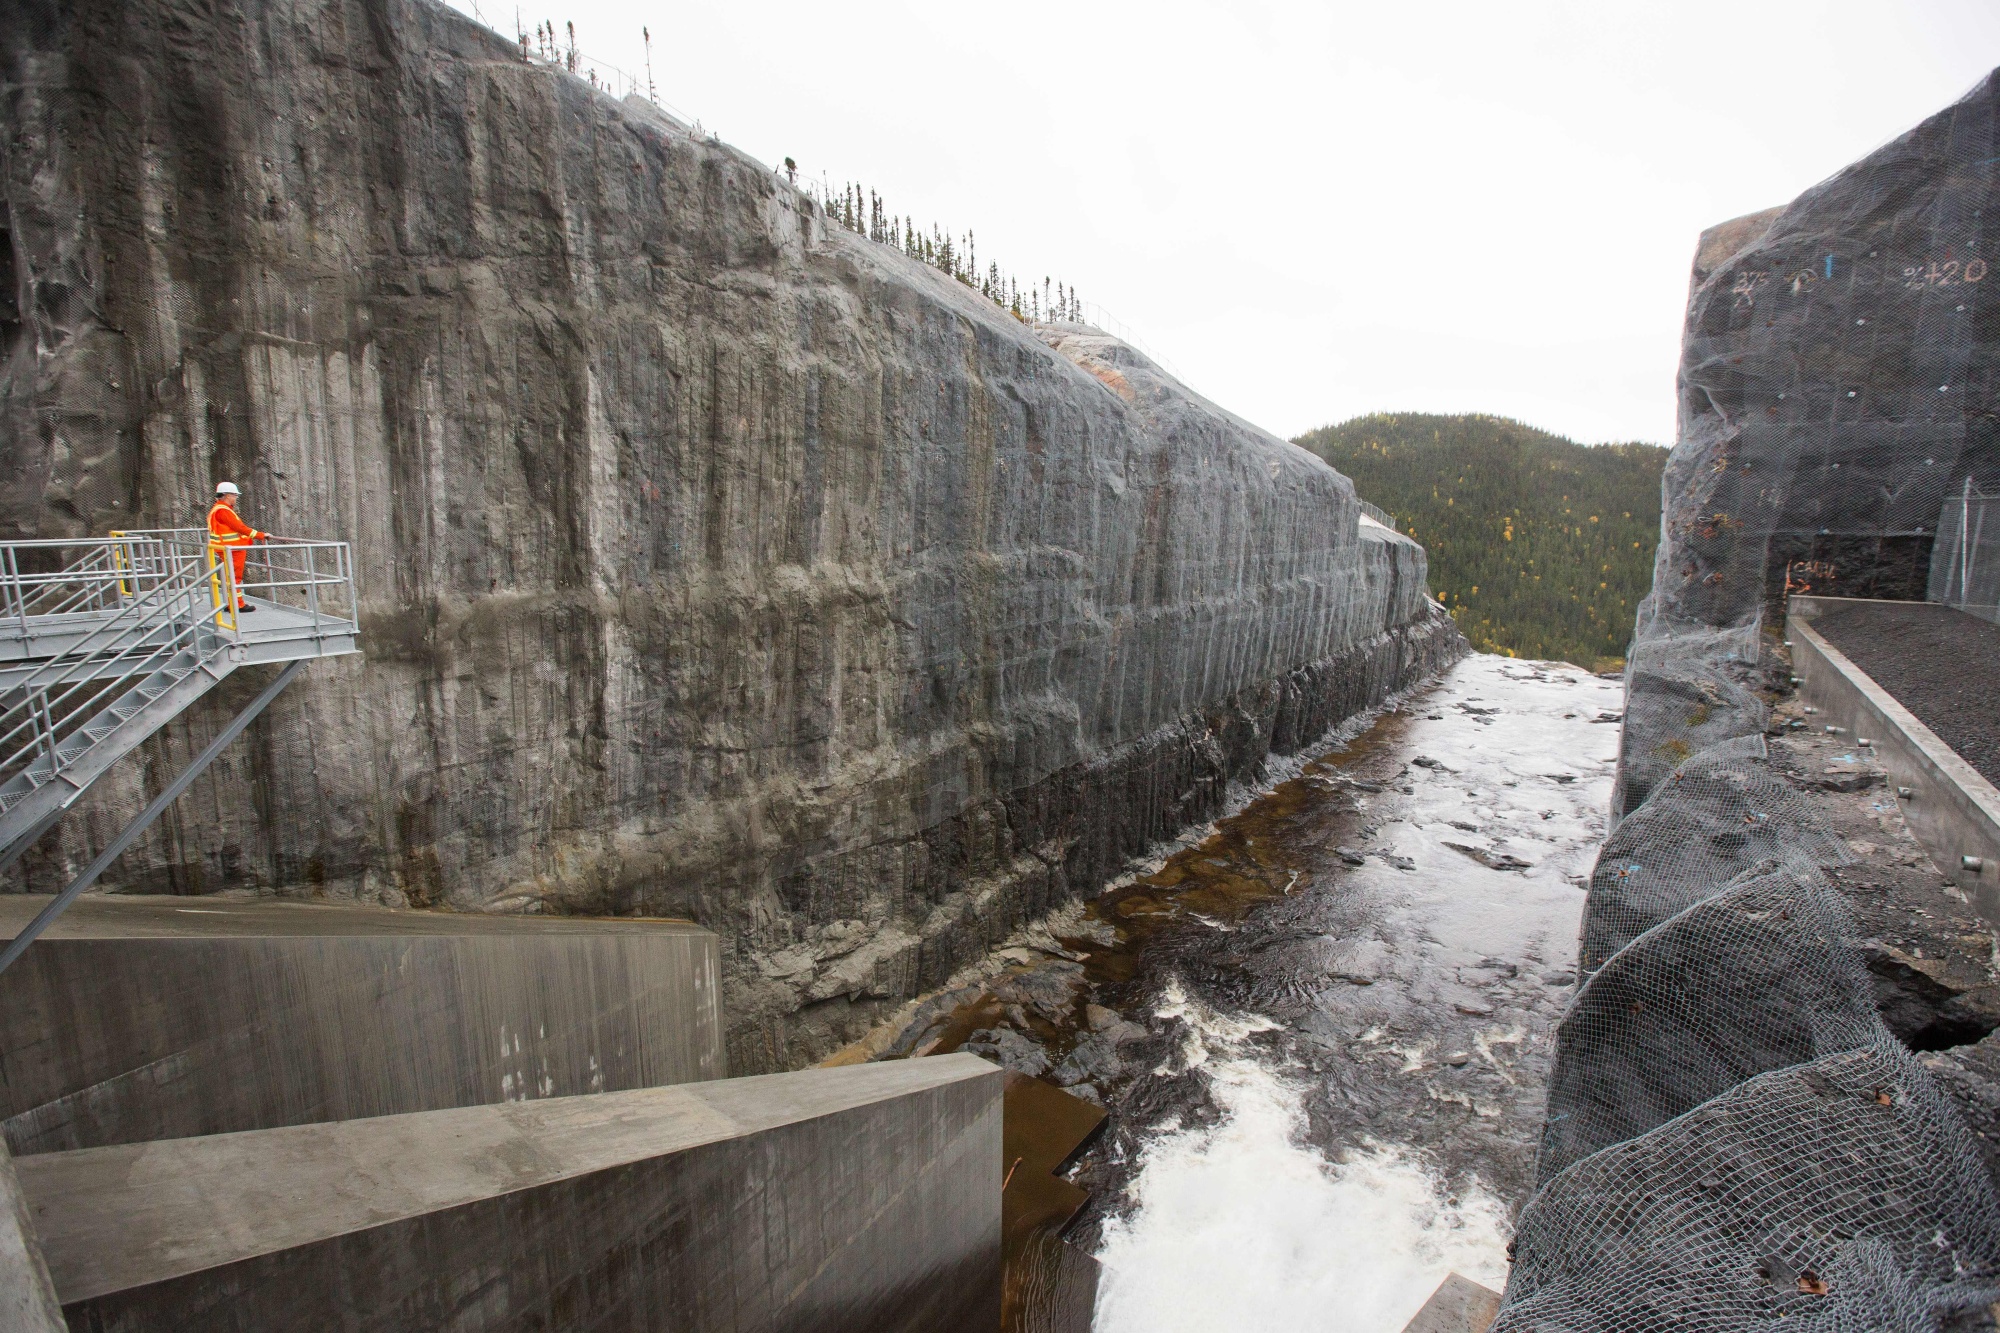 The spillway for Hydro-Quebec’s Romaine 3 hydroelectric dam in the Côte-Nord Administrative Region of Canada.